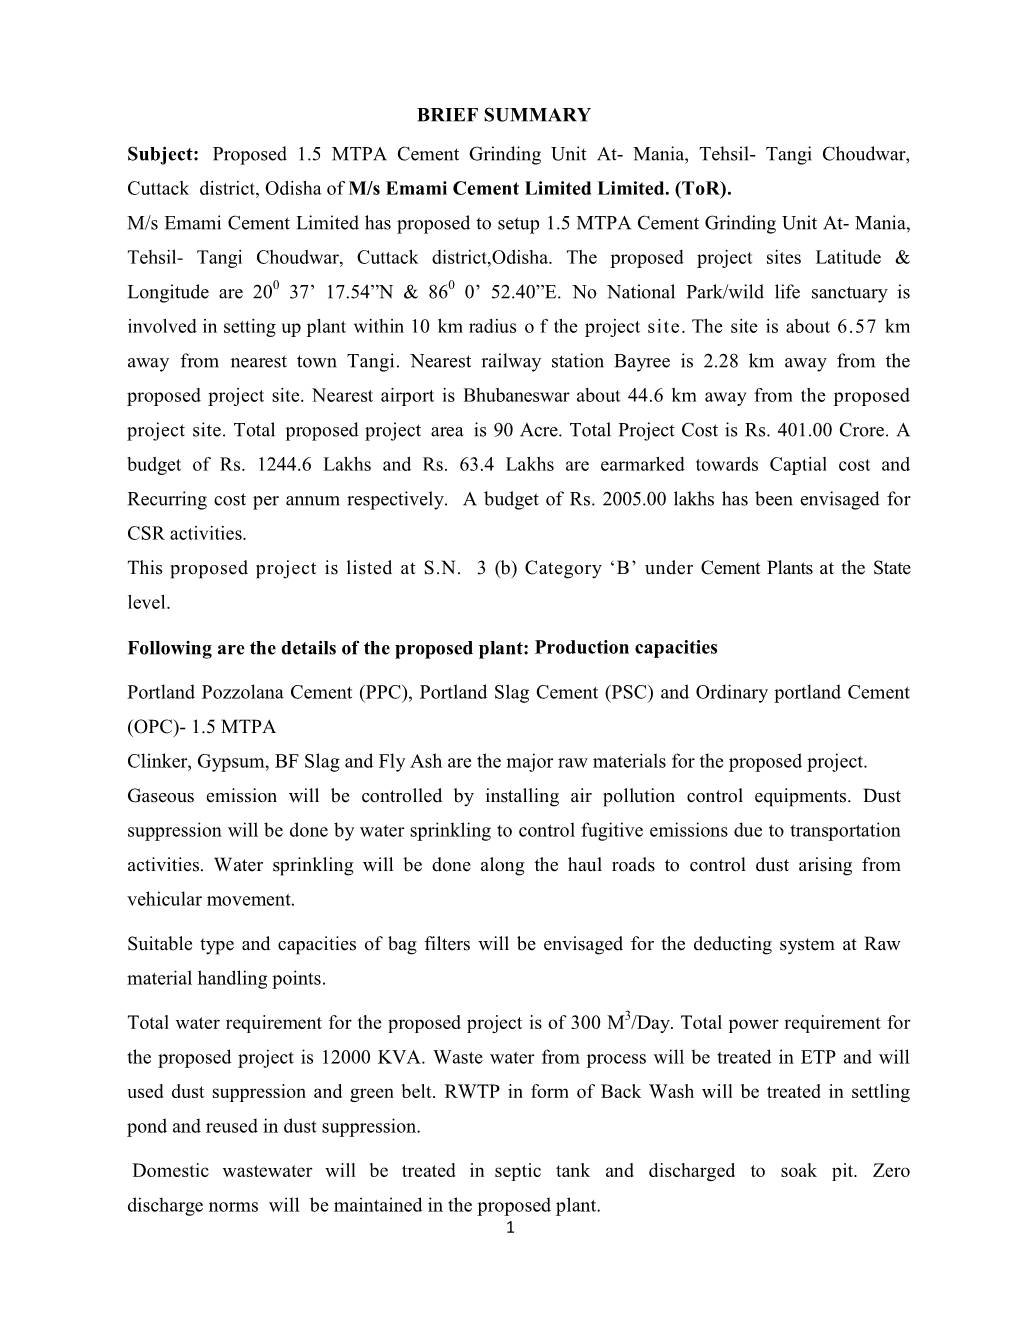 BRIEF SUMMARY Subject: Proposed 1.5 MTPA Cement Grinding Unit At- Mania, Tehsil- Tangi Choudwar, Cuttack District, Odisha of M/S Emami Cement Limited Limited